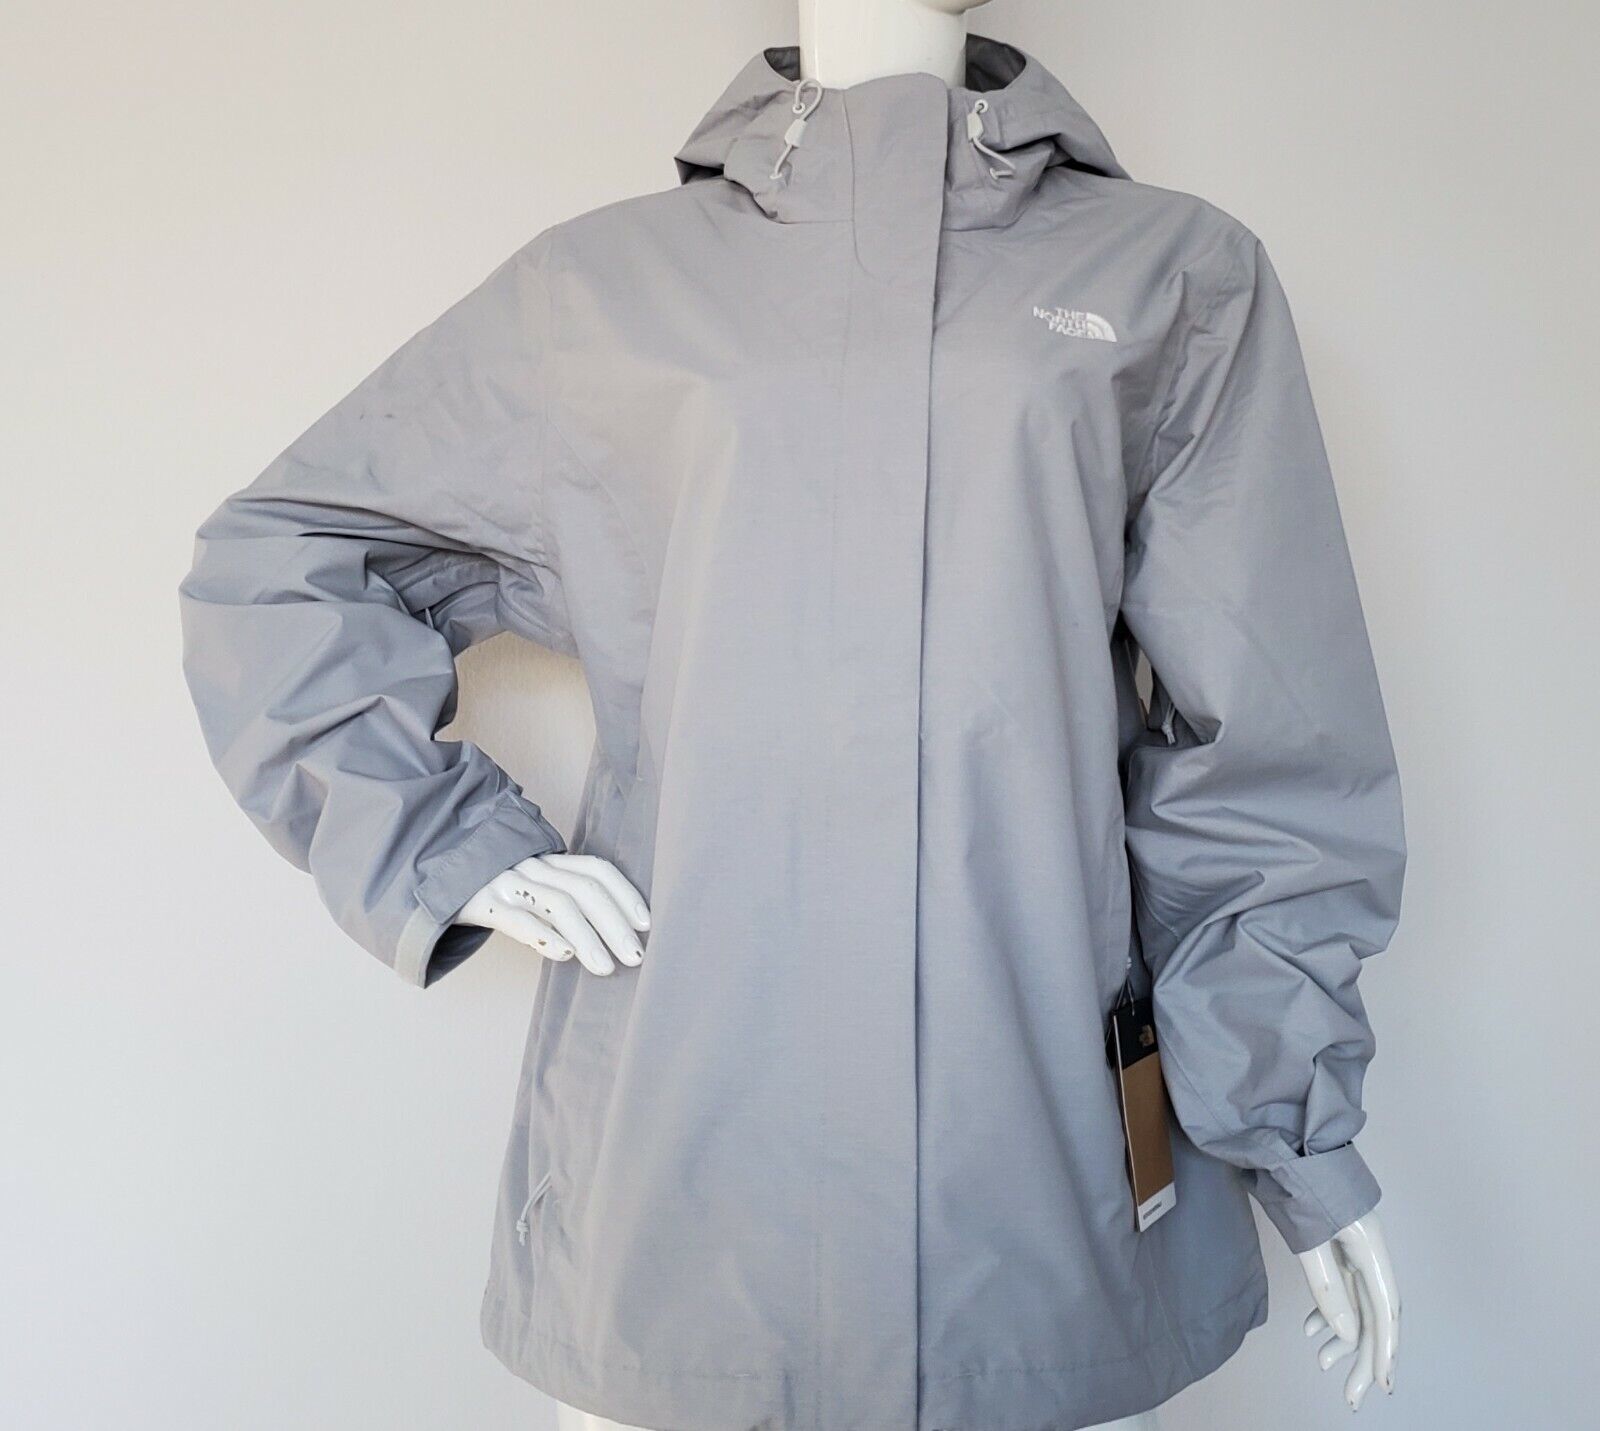 THE NORTH FACE WOMEN LUX OSITO FLEECE FULL ZIP JACKET MELD GREY size S M L